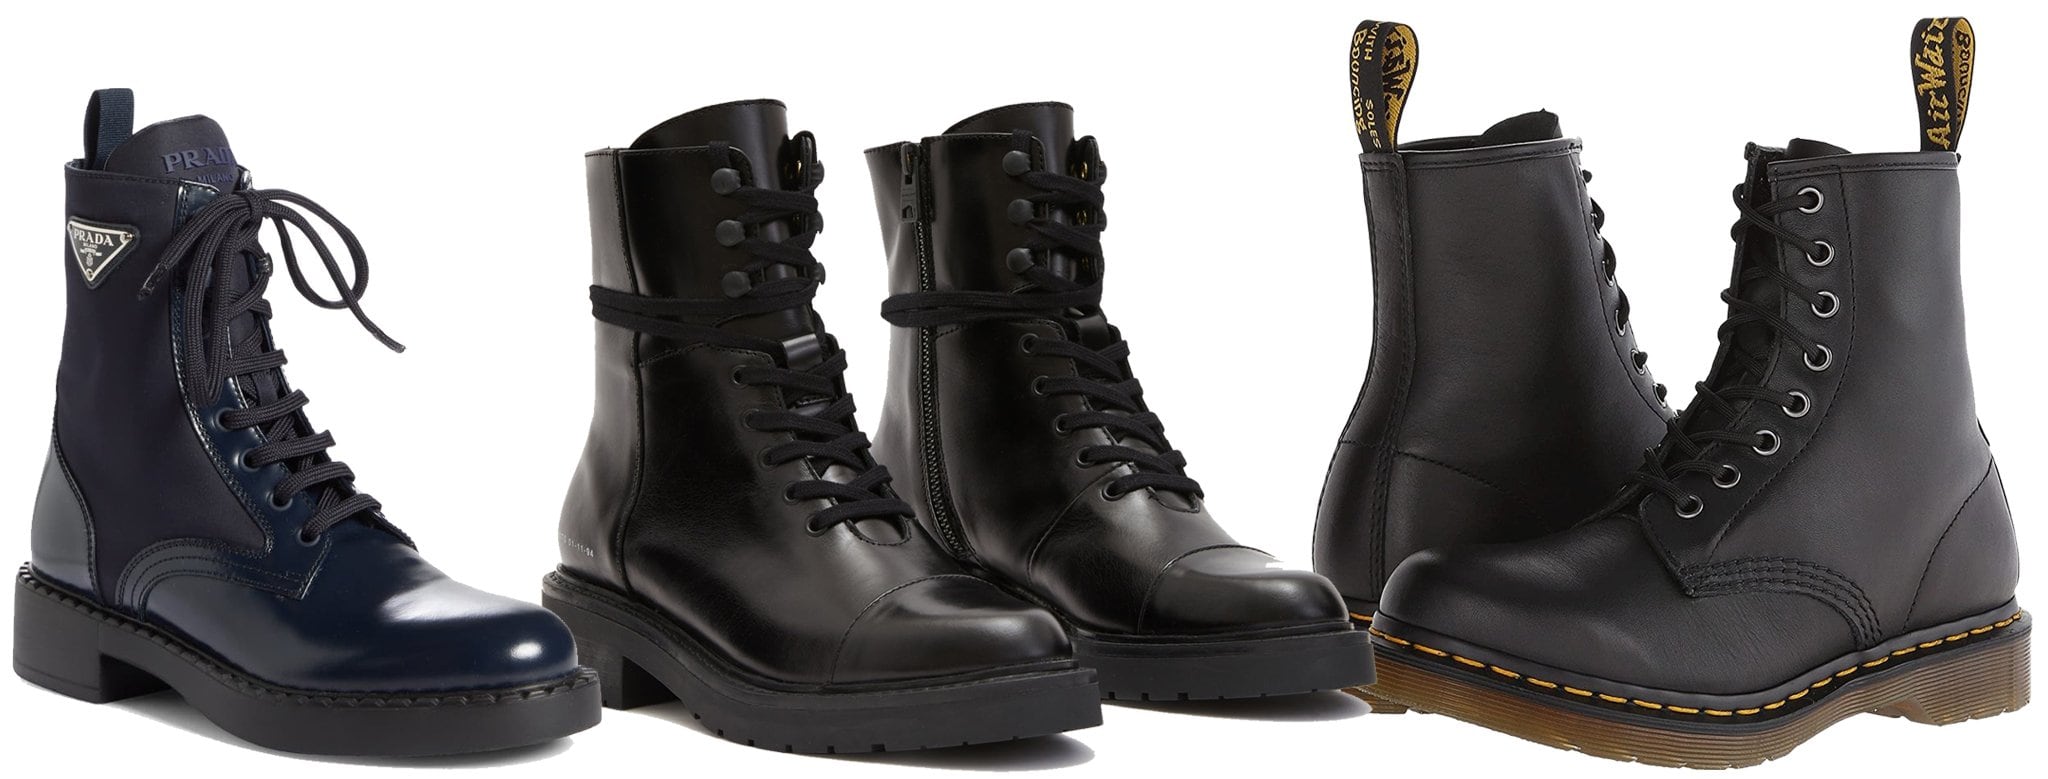 Prada Combat Boot; All Saints Dusty Leather Boots; Dr. Martens 1460 Boots